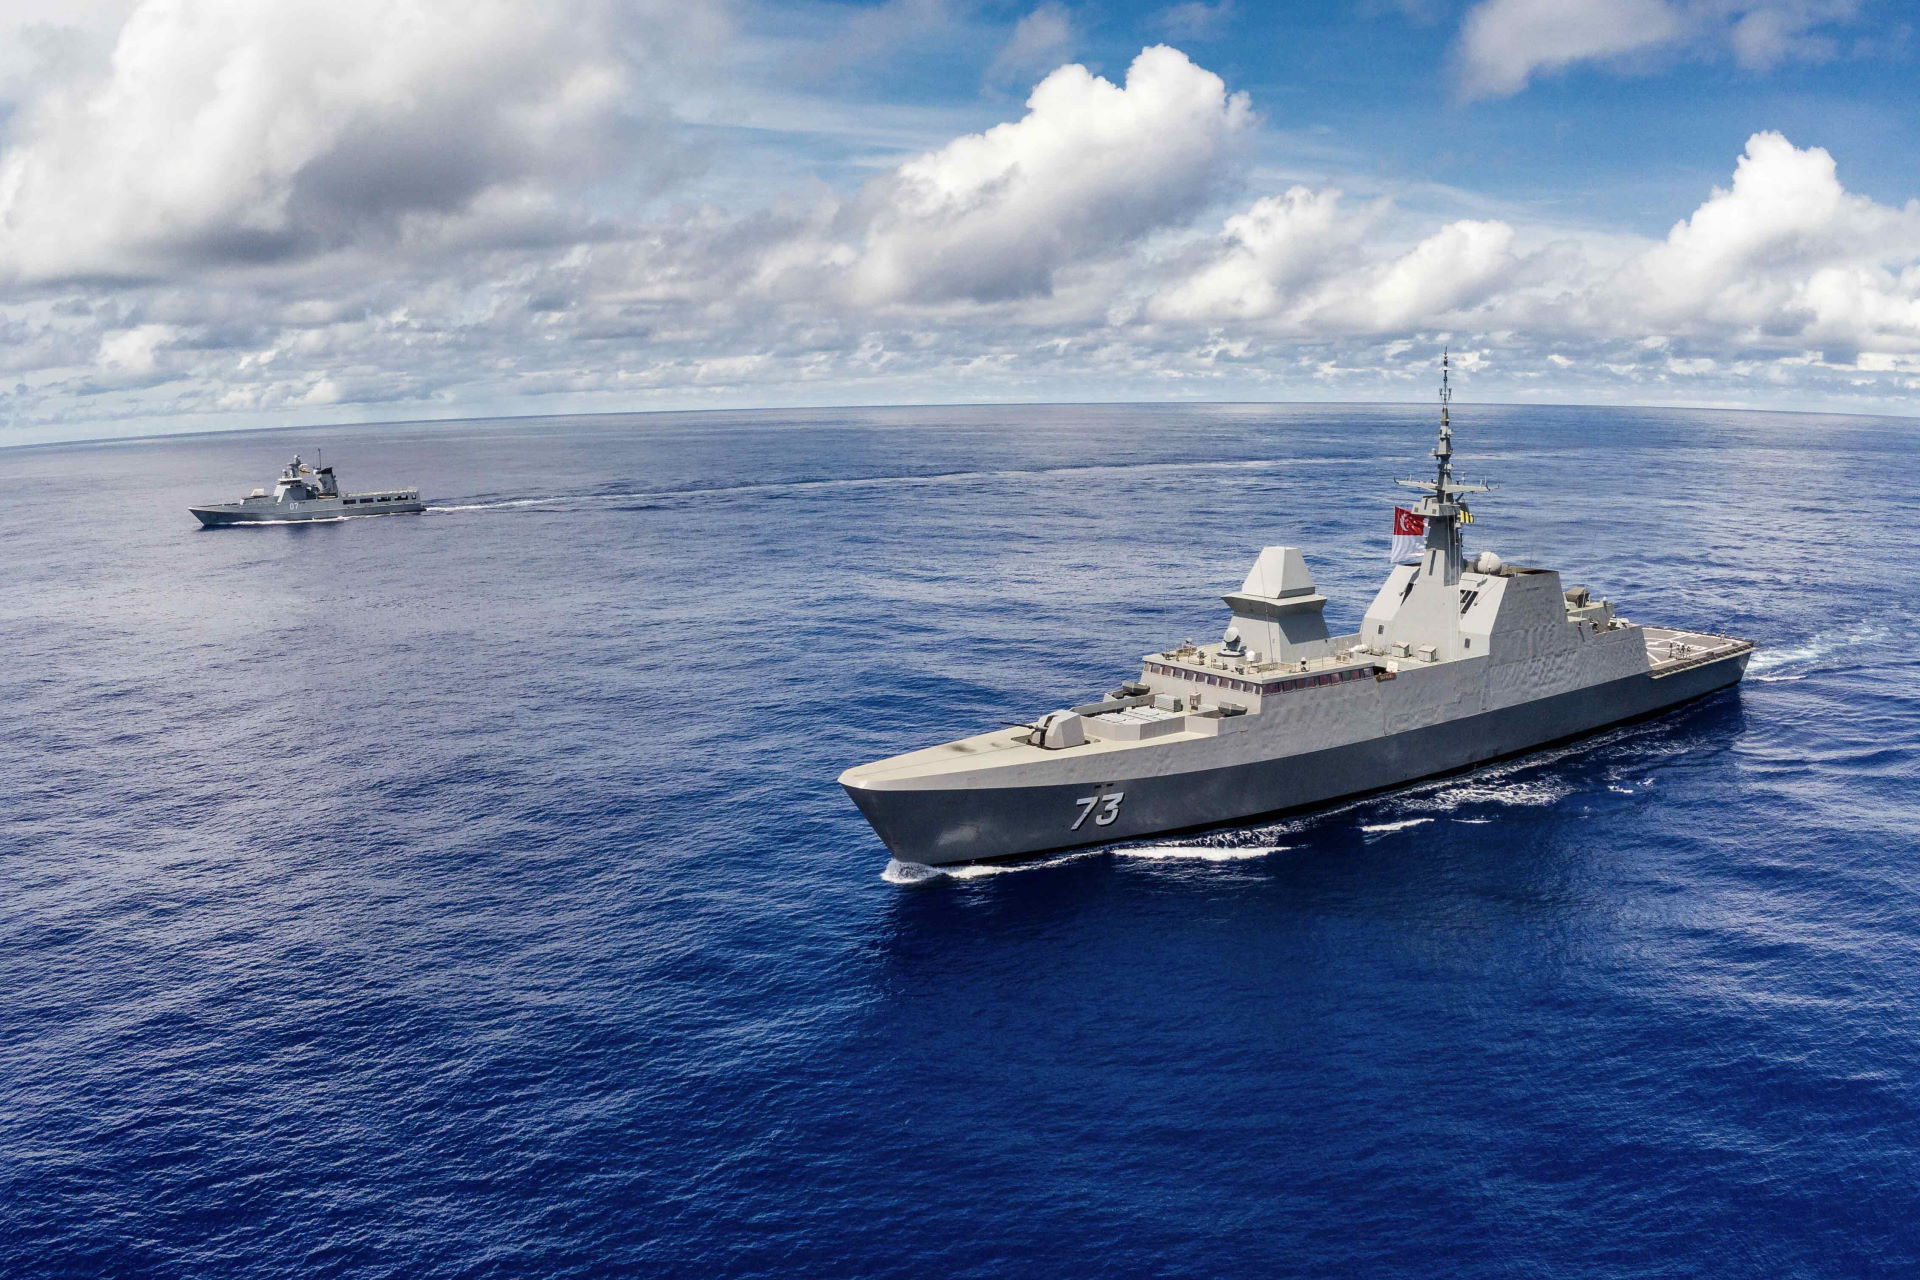 RSS Supreme (right) and KDB Darulehsan (left) during Exercise Pelican 2020.